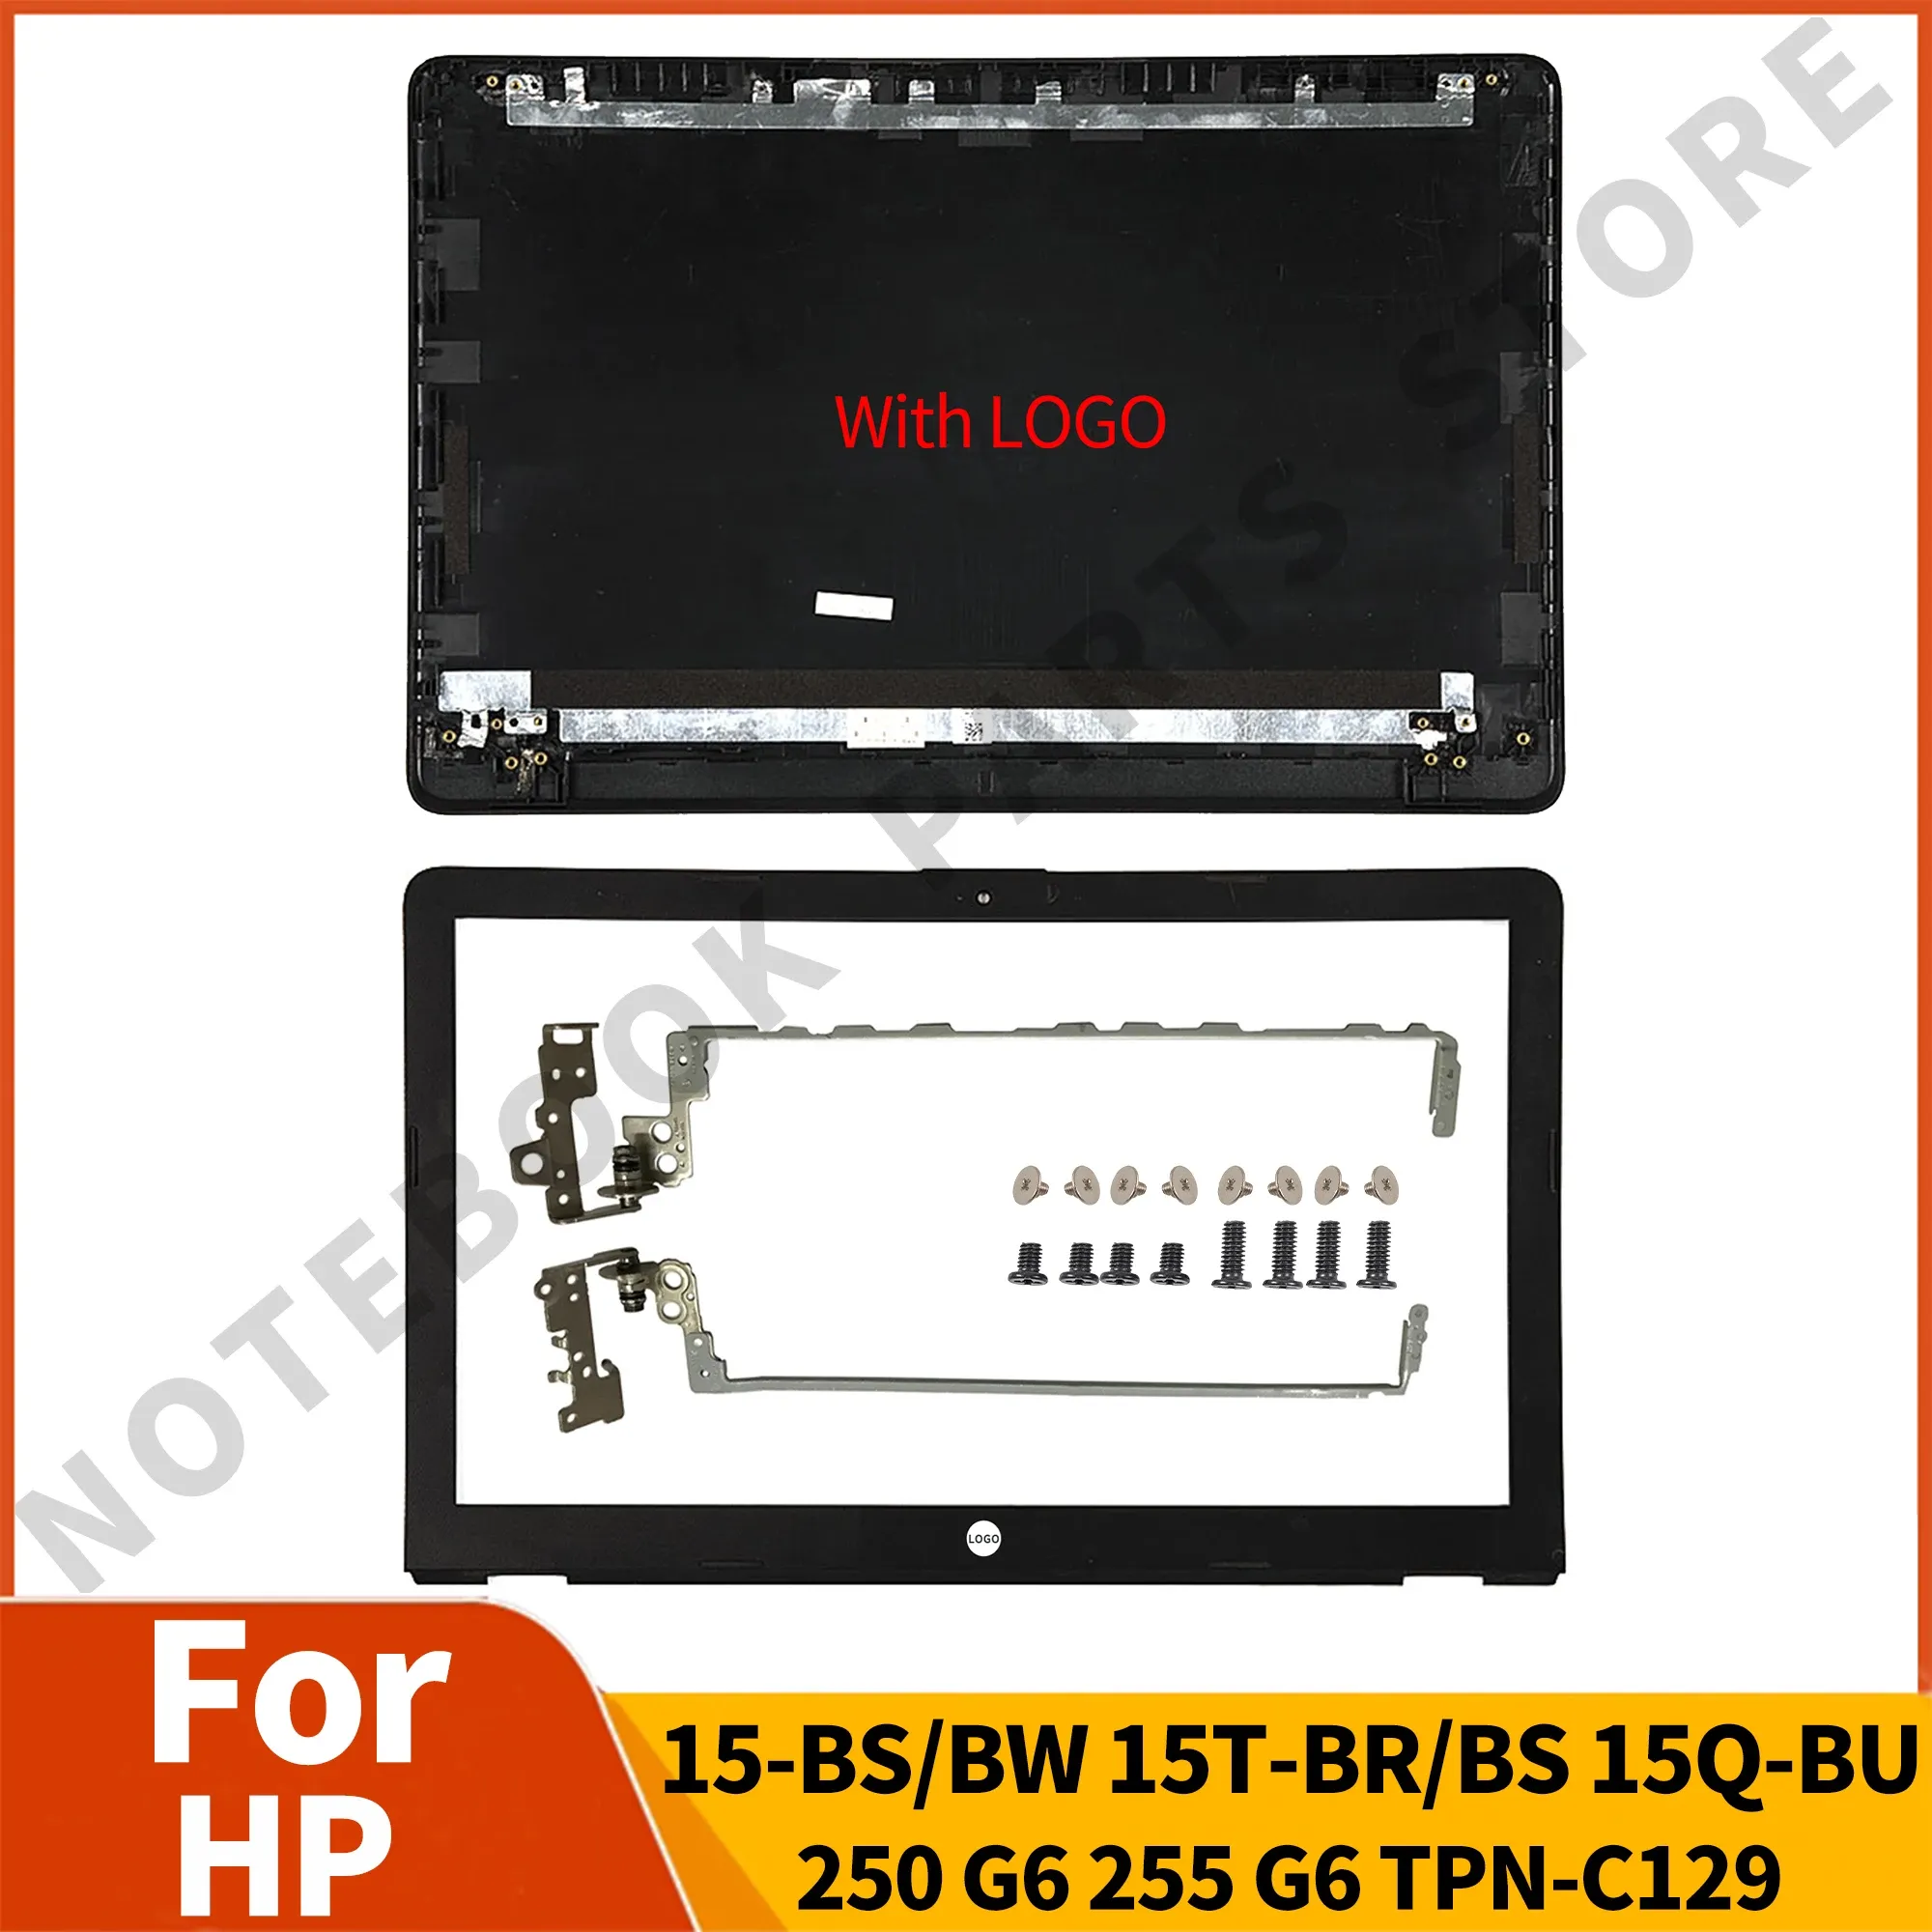 Fall Nytt för HP 15BS 15TBS 15BW 15ZBW 250 G6 255 G6 LAPTOP LCD BACK COVER/FRONT REZEL HINGSES NOTERBOOK PARTS REPLACION Black